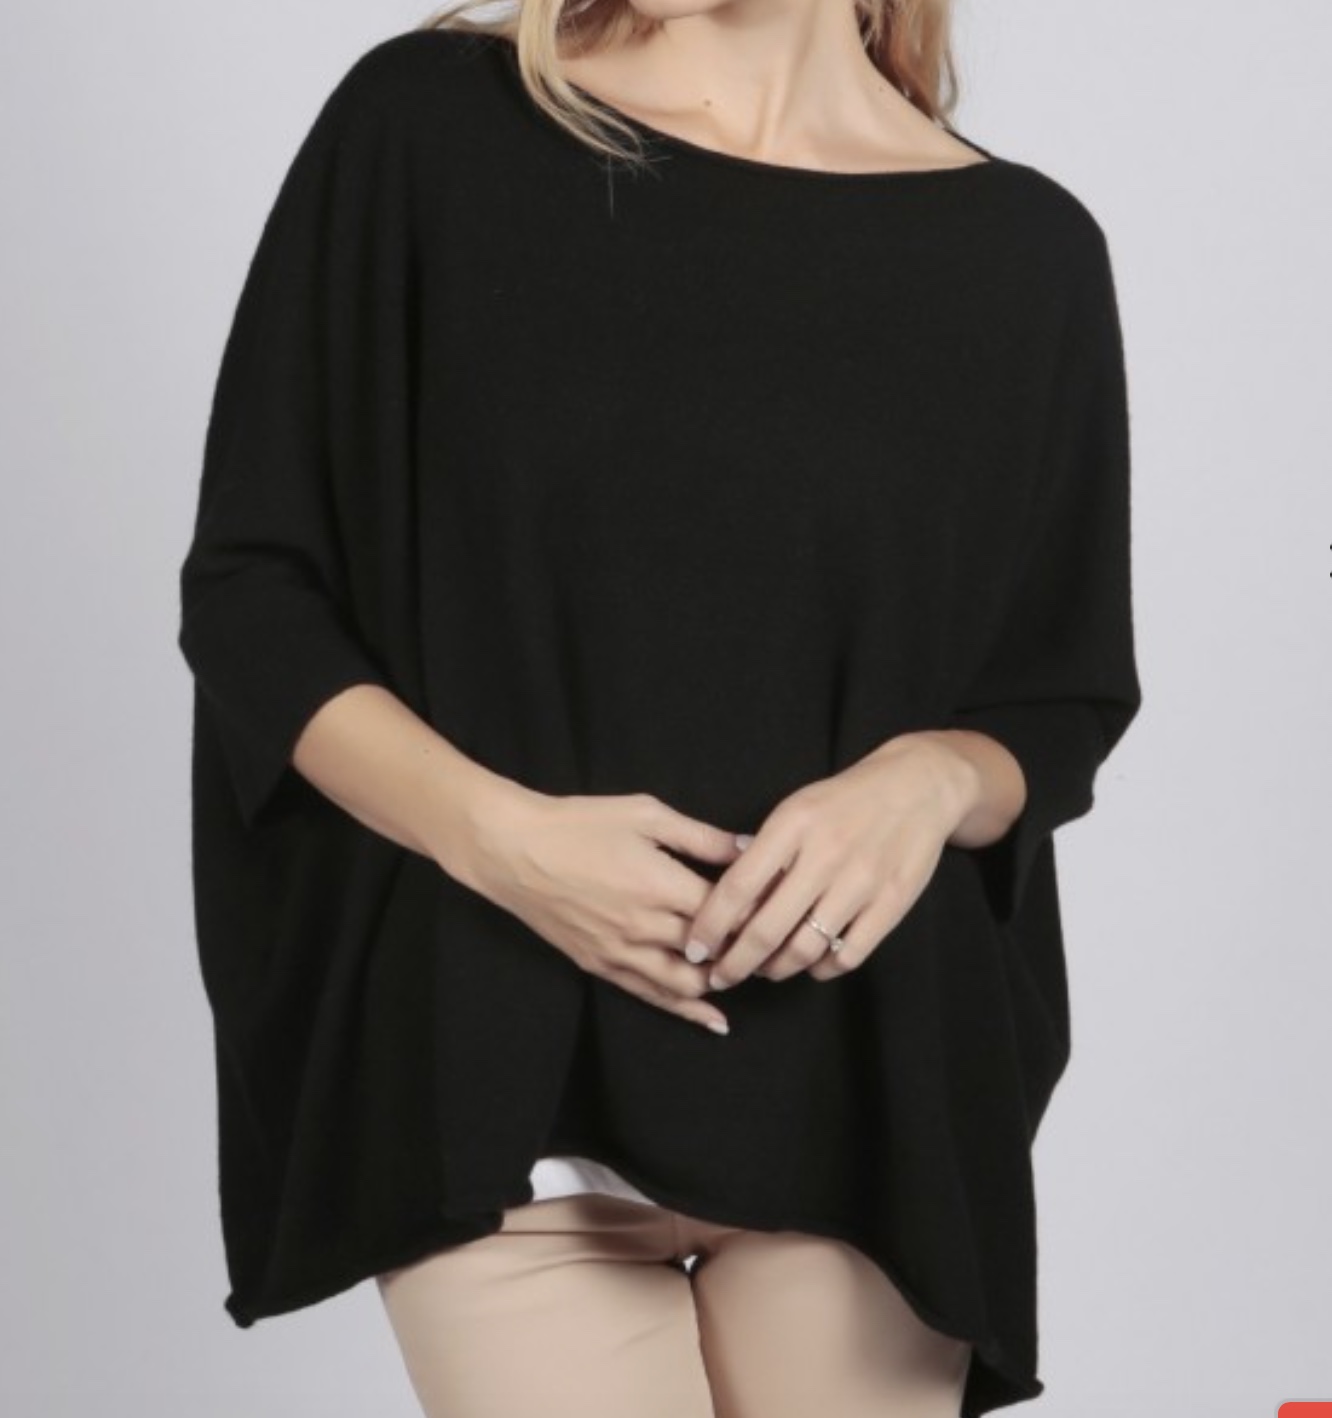 italy in cashmere black pure cashmere short sleeved oversized batwing sweater